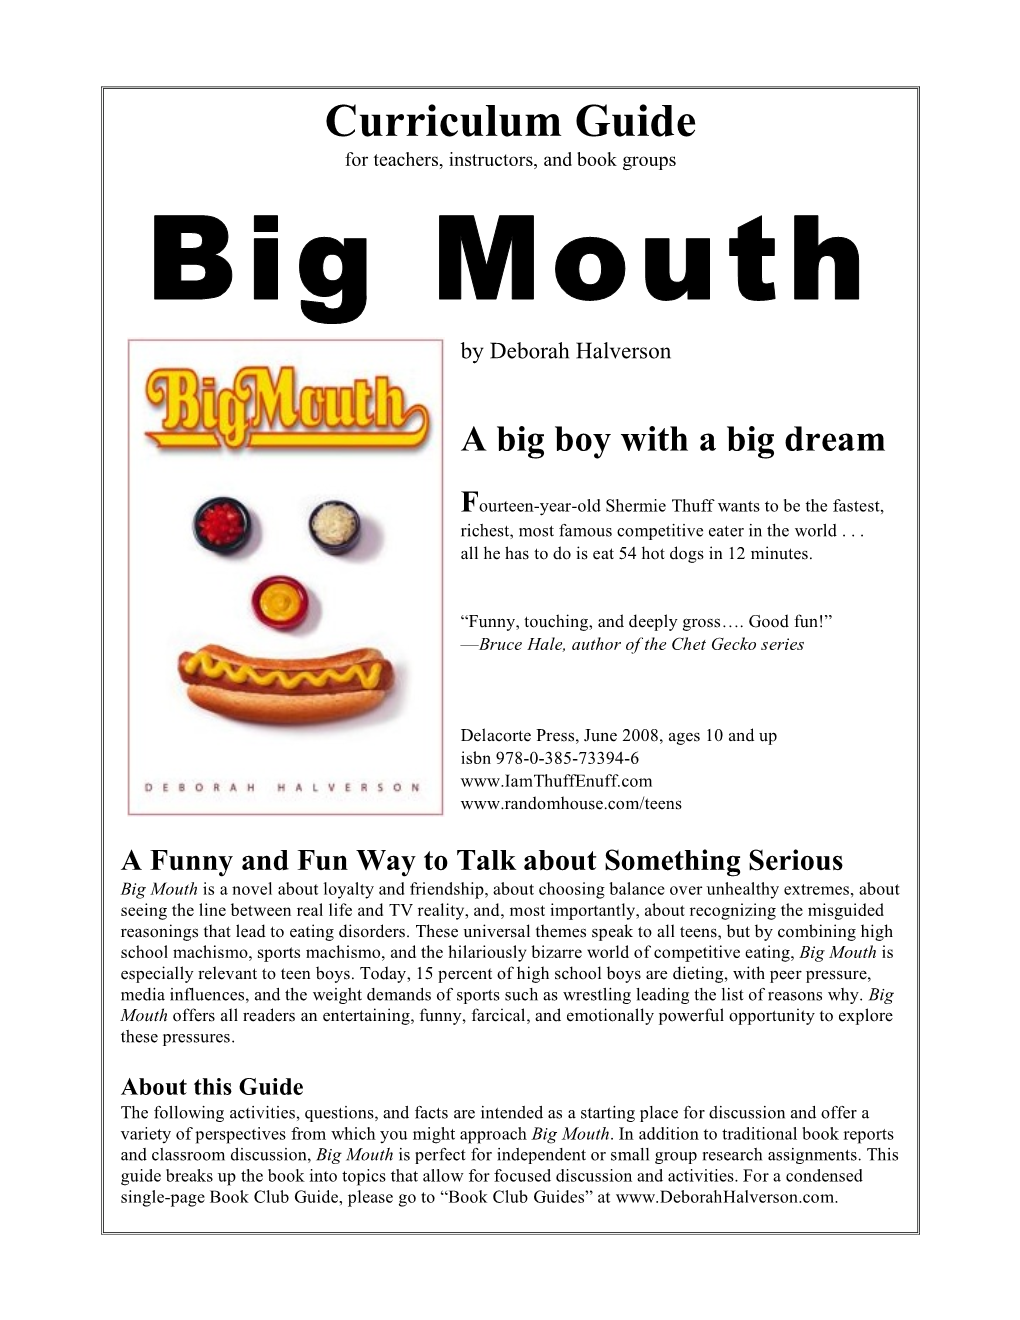 BIG MOUTH Curriculum Guide